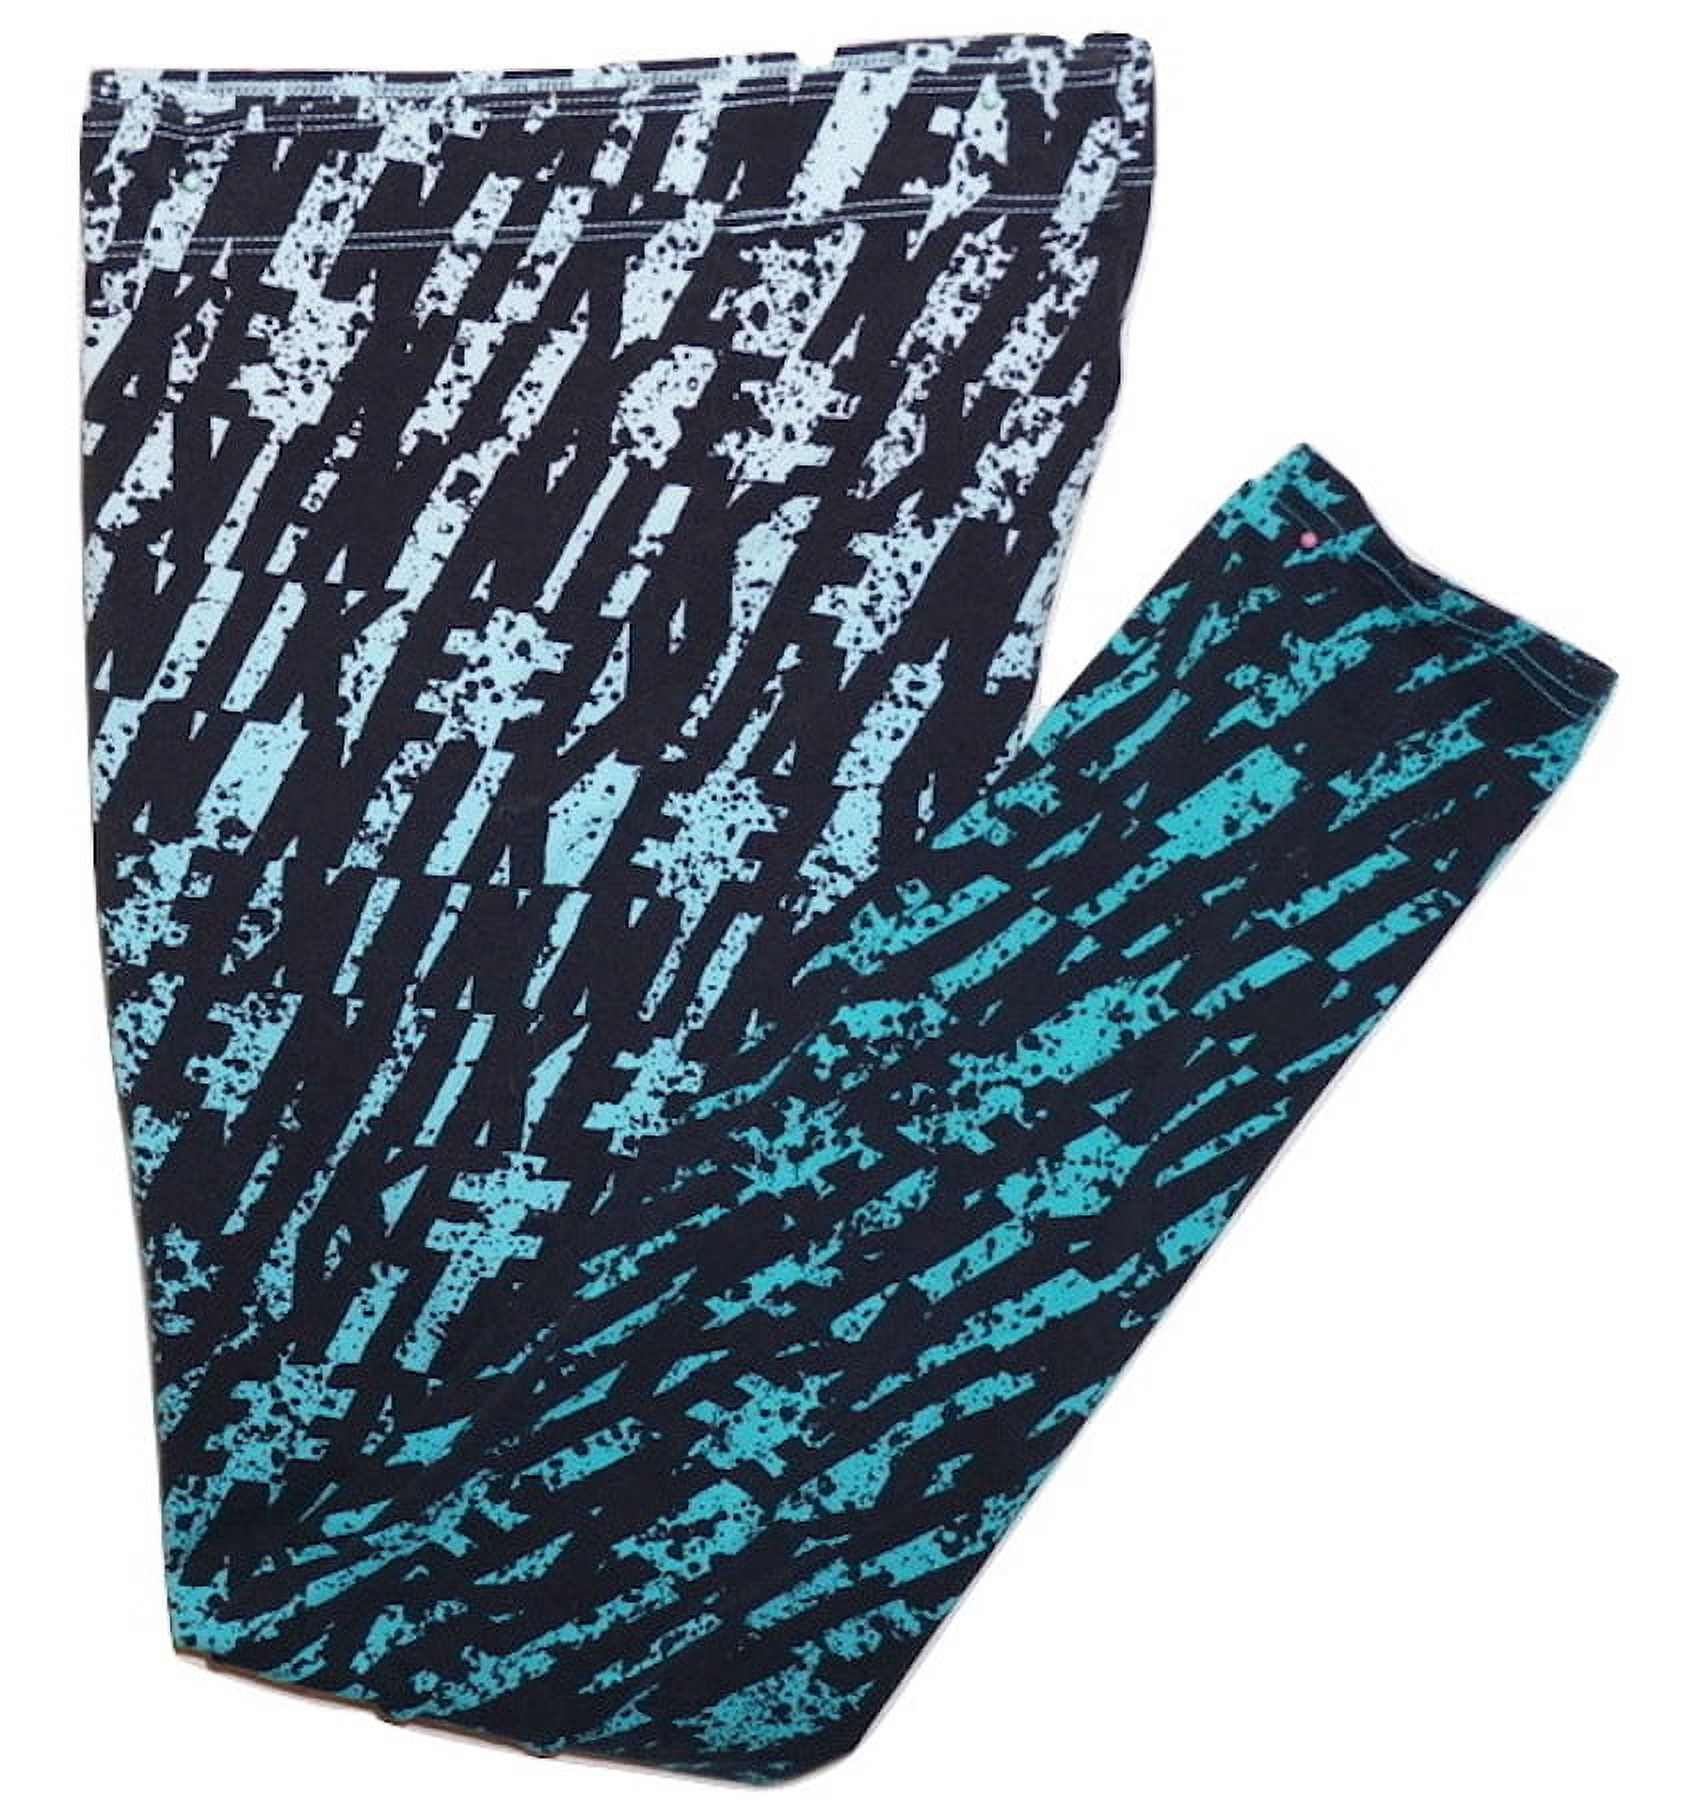 Nike Women's Cotton Club Legging All Over Print Stretch Tights Large - image 1 of 4